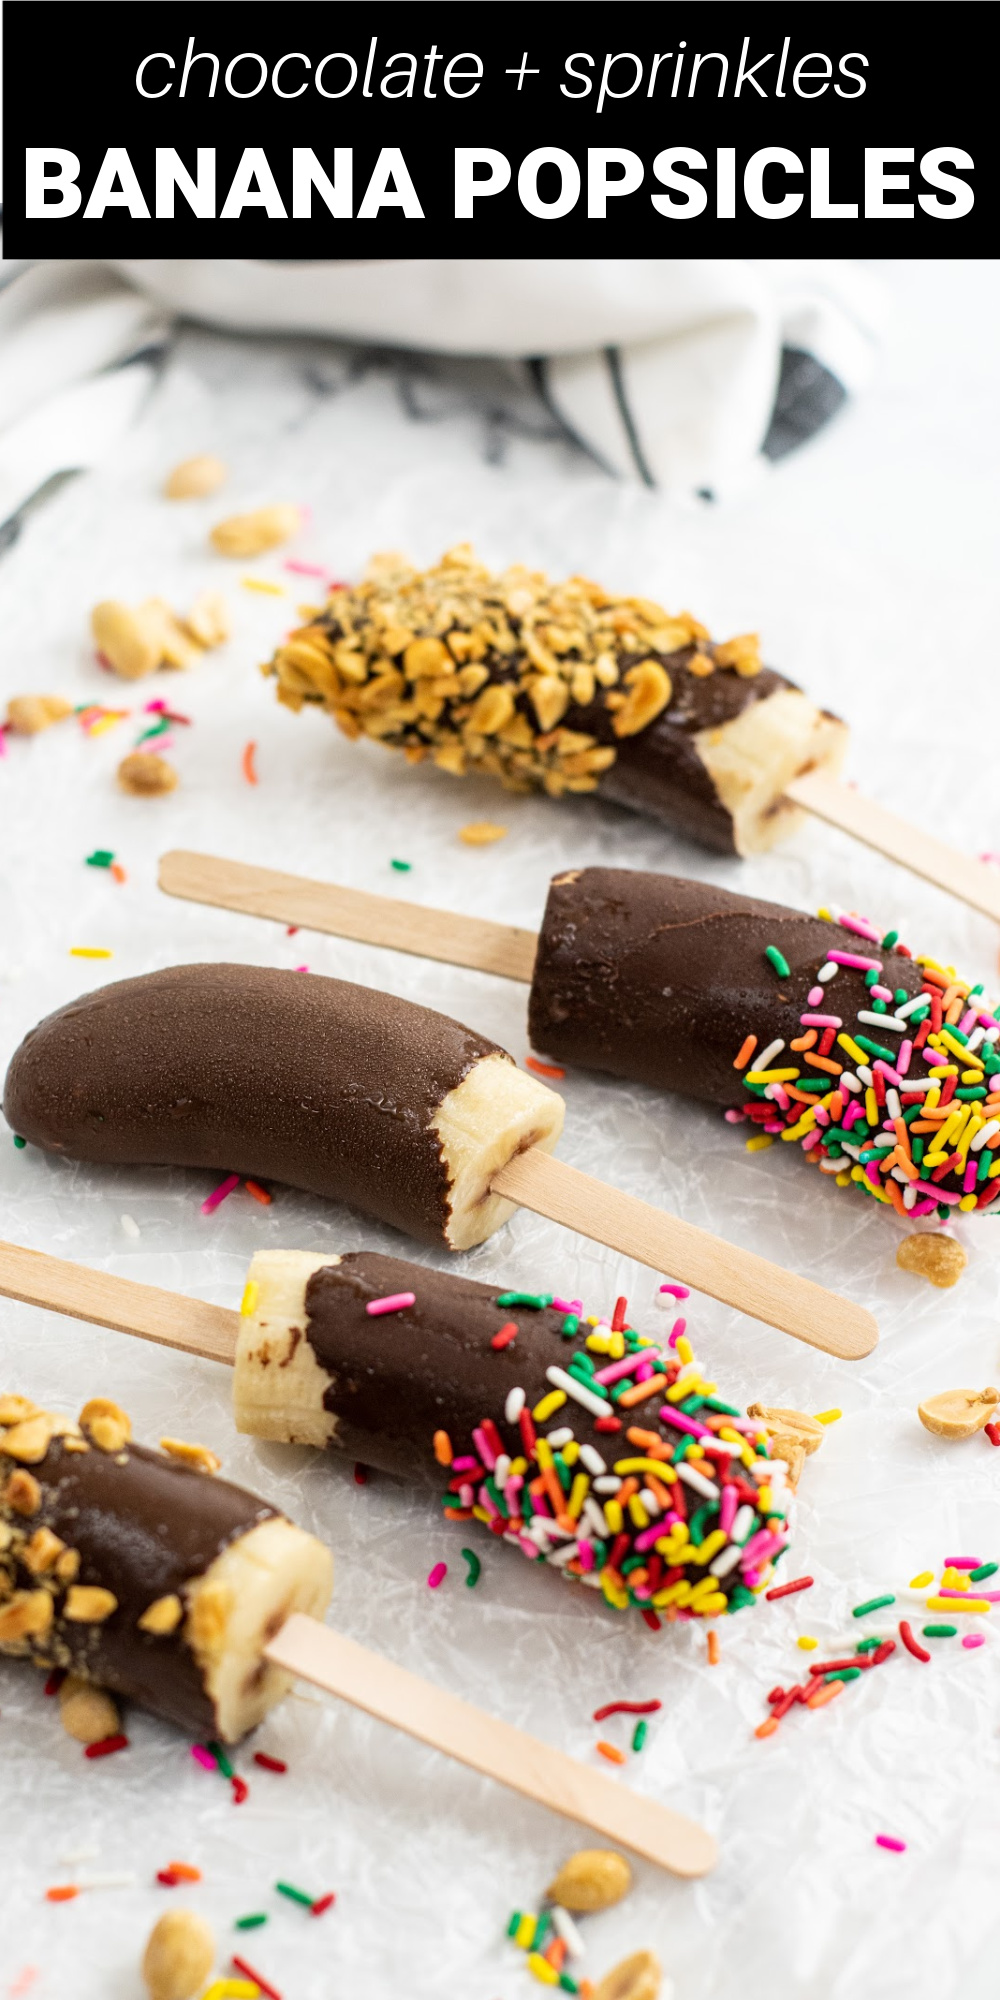 These Chocolate Covered Frozen Banana Pops are made by covering freshly frozen bananas in melted chocolate and adding crushed peanuts and sprinkles on top.